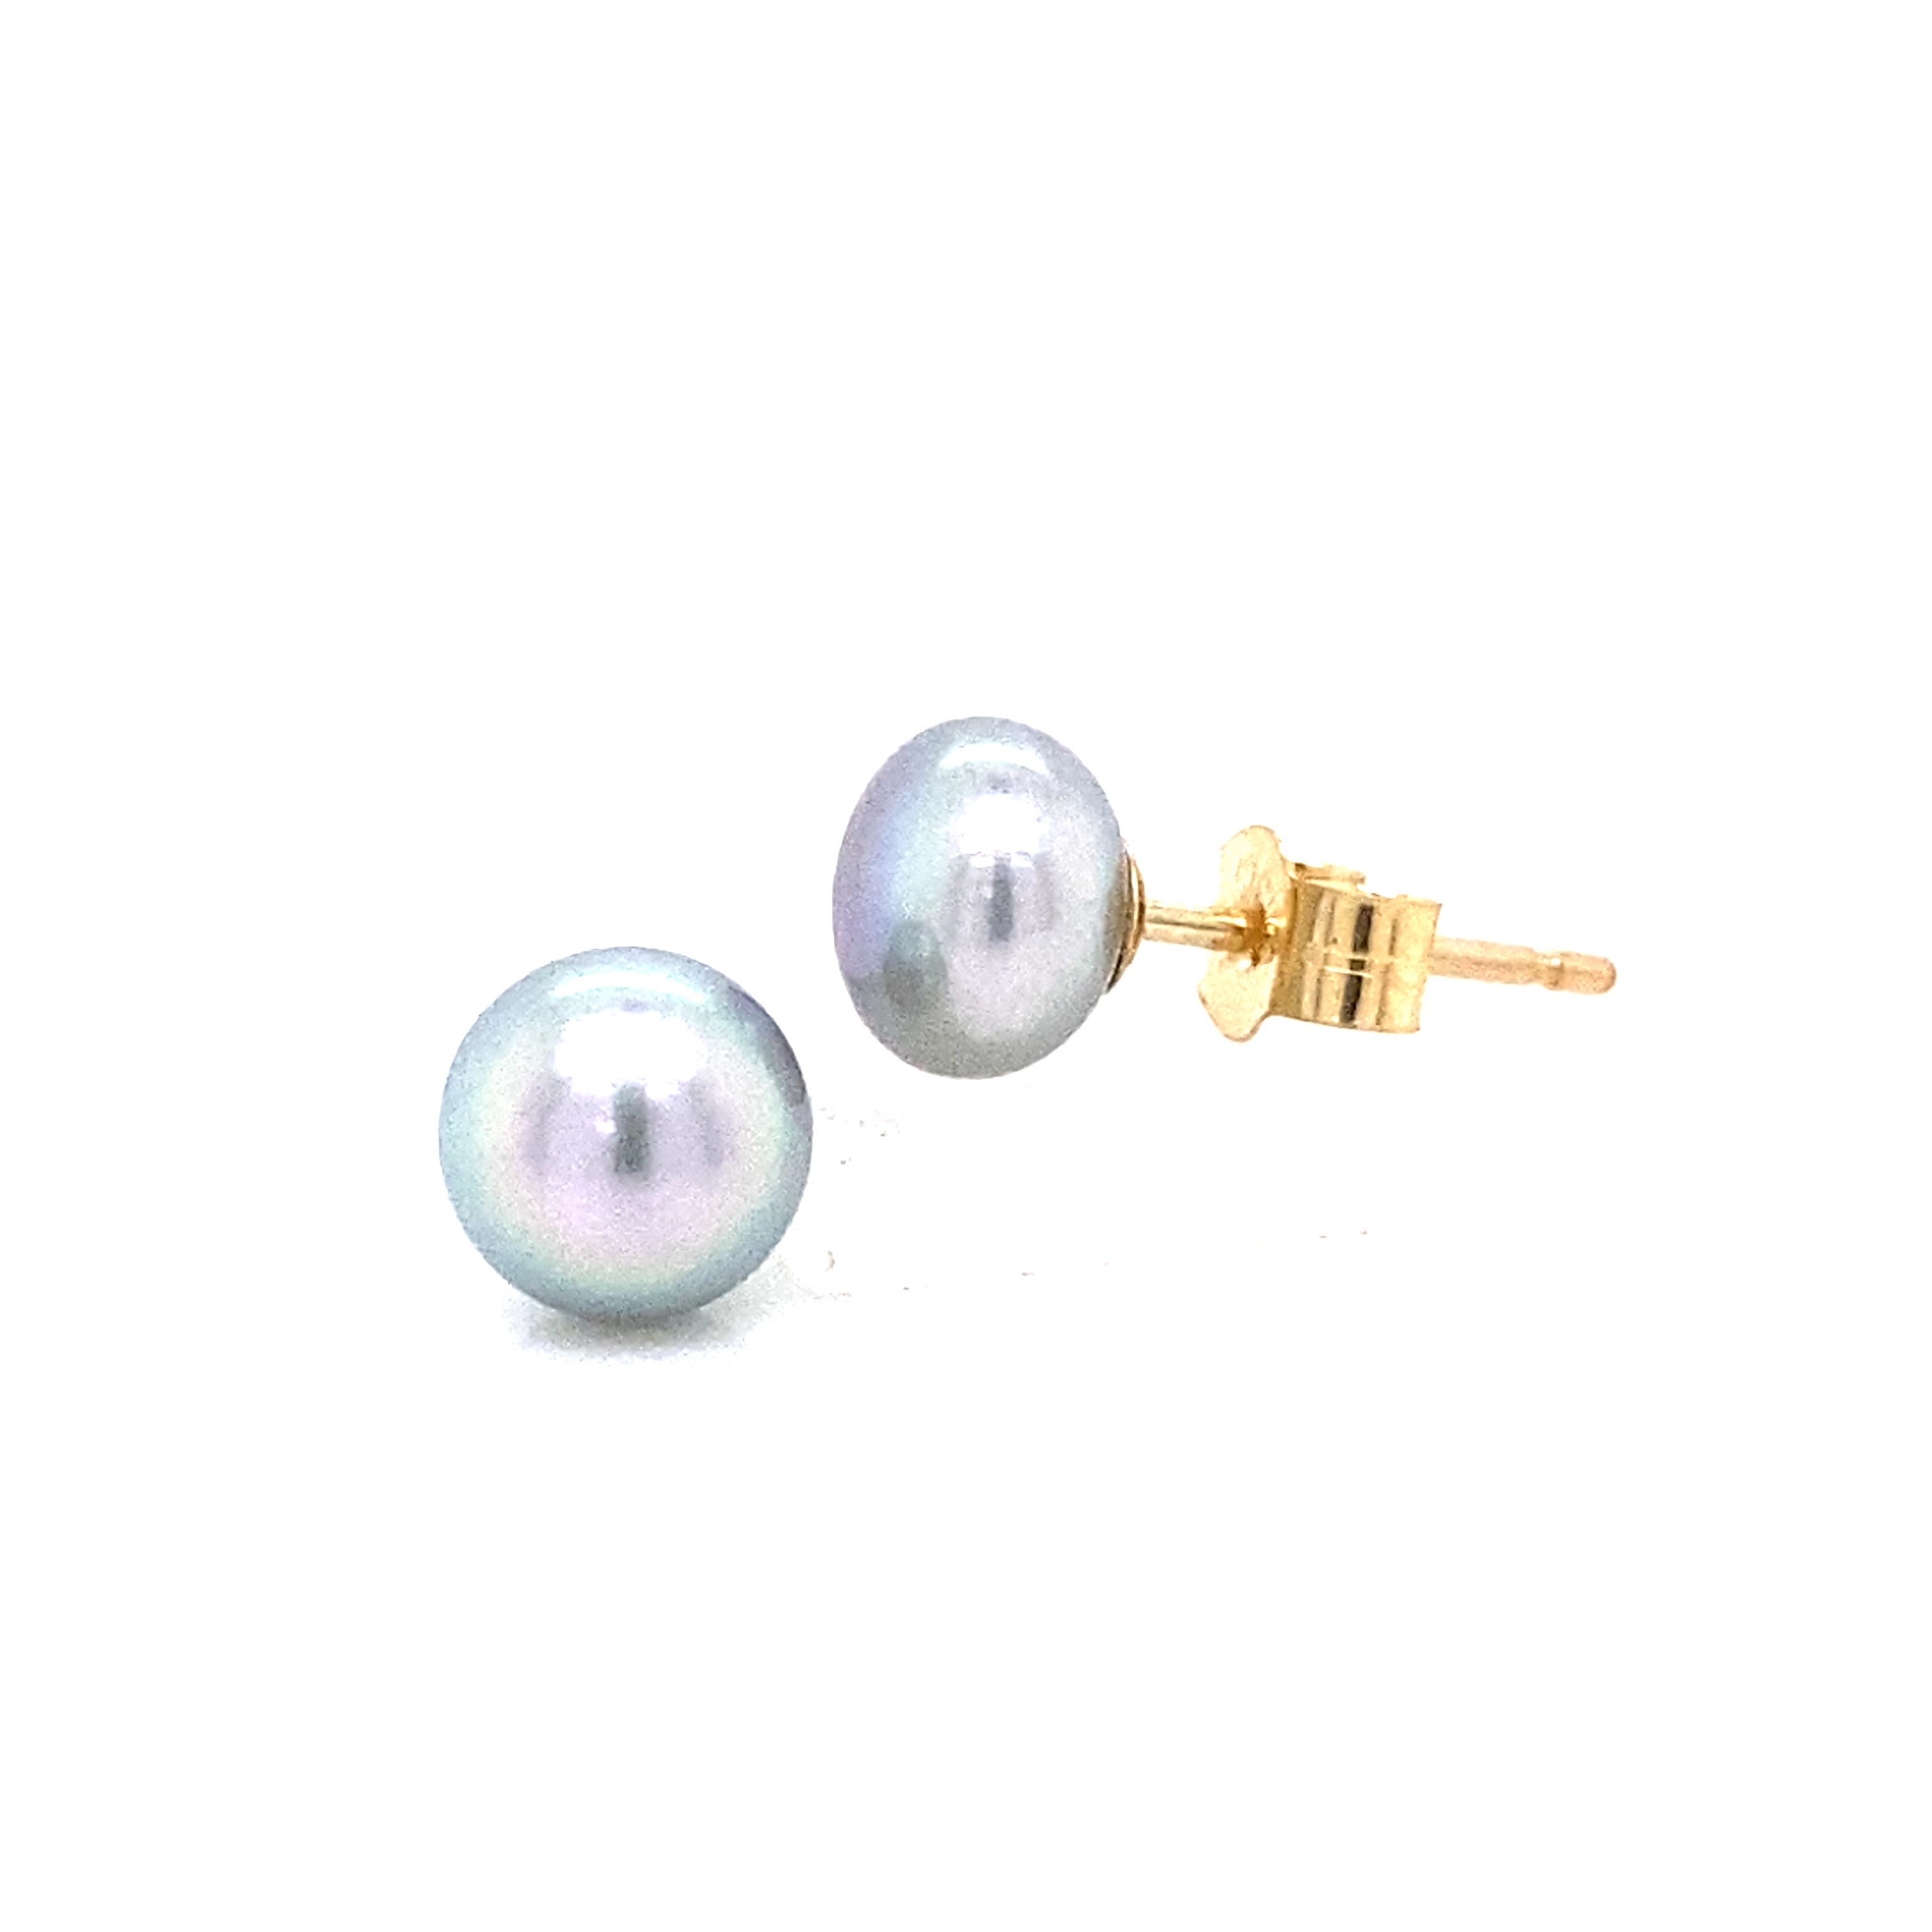 6mm Grey Pearl Studs on 9 Carat Yellow Gold Posts